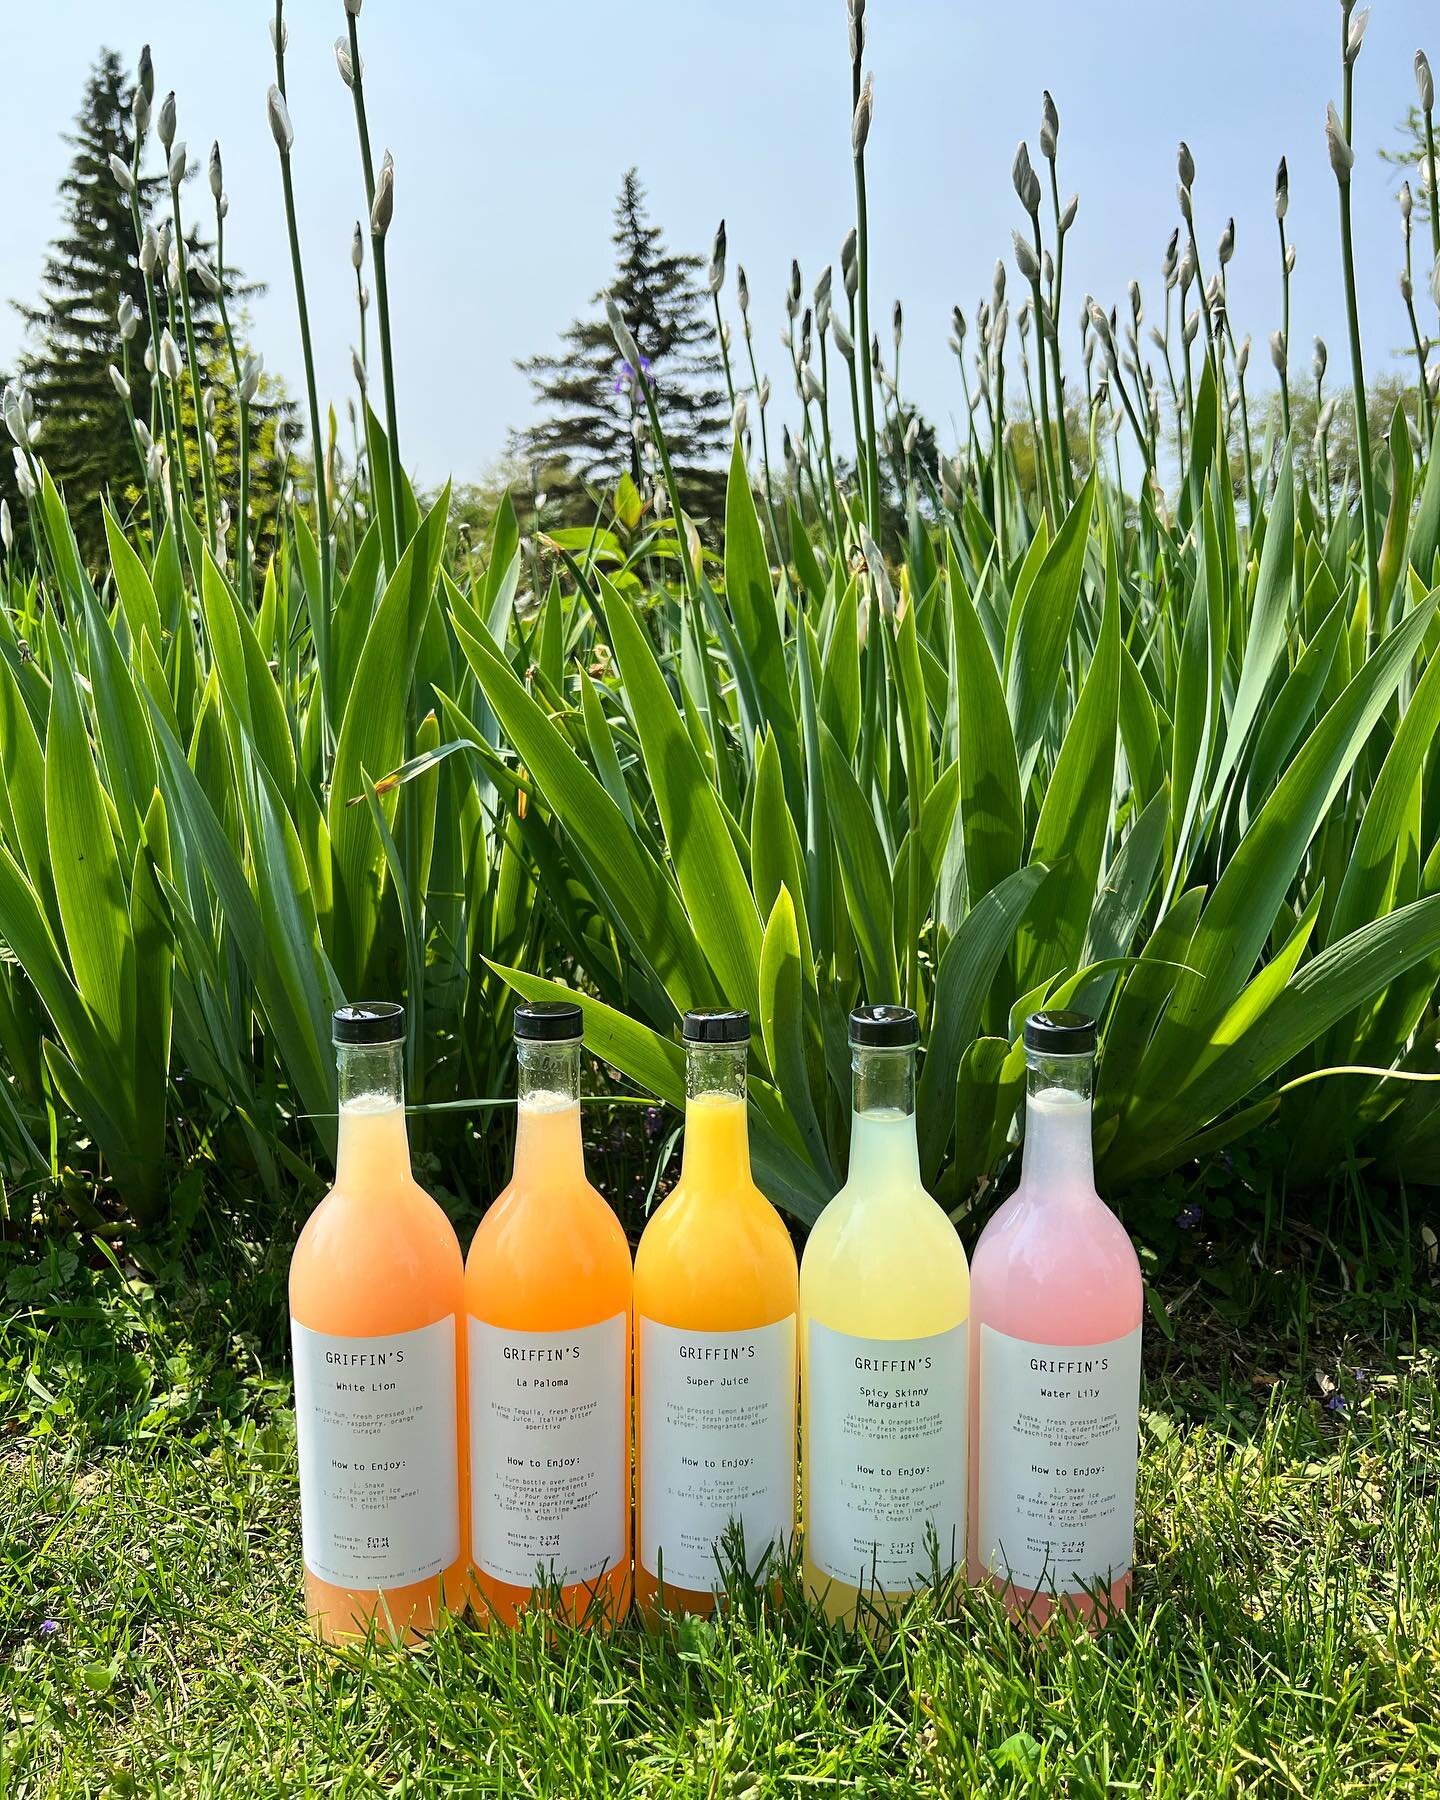 Spring is in the air! 🌷
 
We are LOVIN&rsquo; the flavors and colors of our spring line up. We&rsquo;re also super excited to participate in our first fair this weekend! If you&rsquo;re looking for something fun to do, visit us at Wilmette French Ma